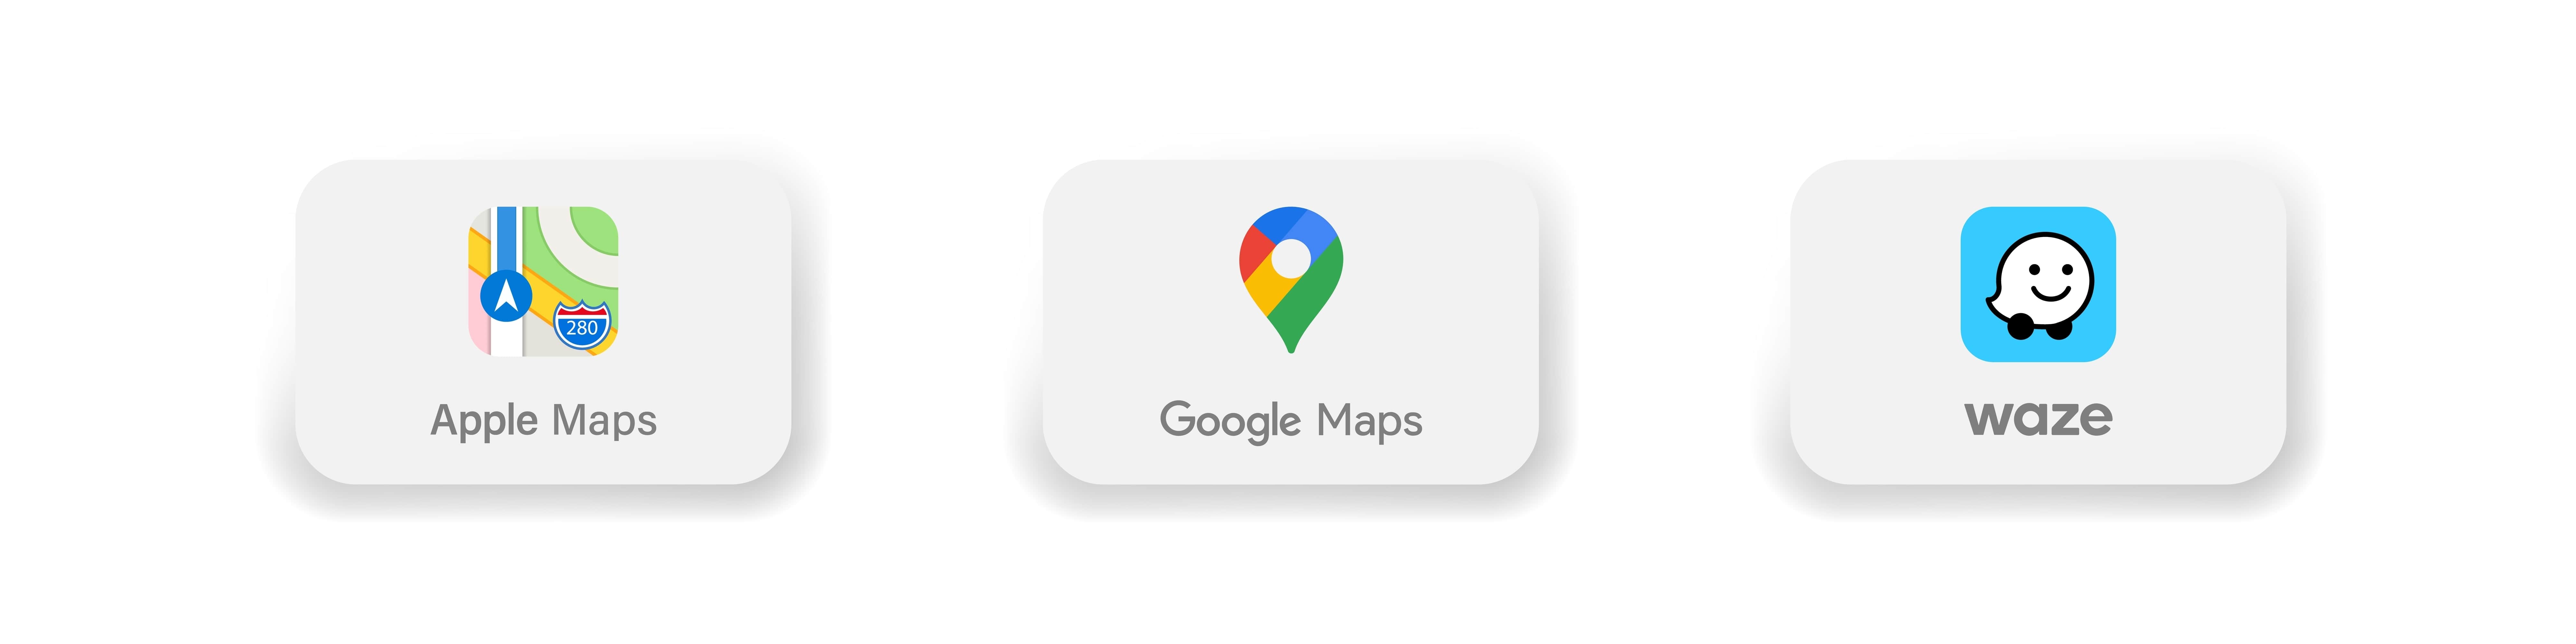 Three well-known navigation applications. They are Apple Maps, Google Maps, and WAZE.